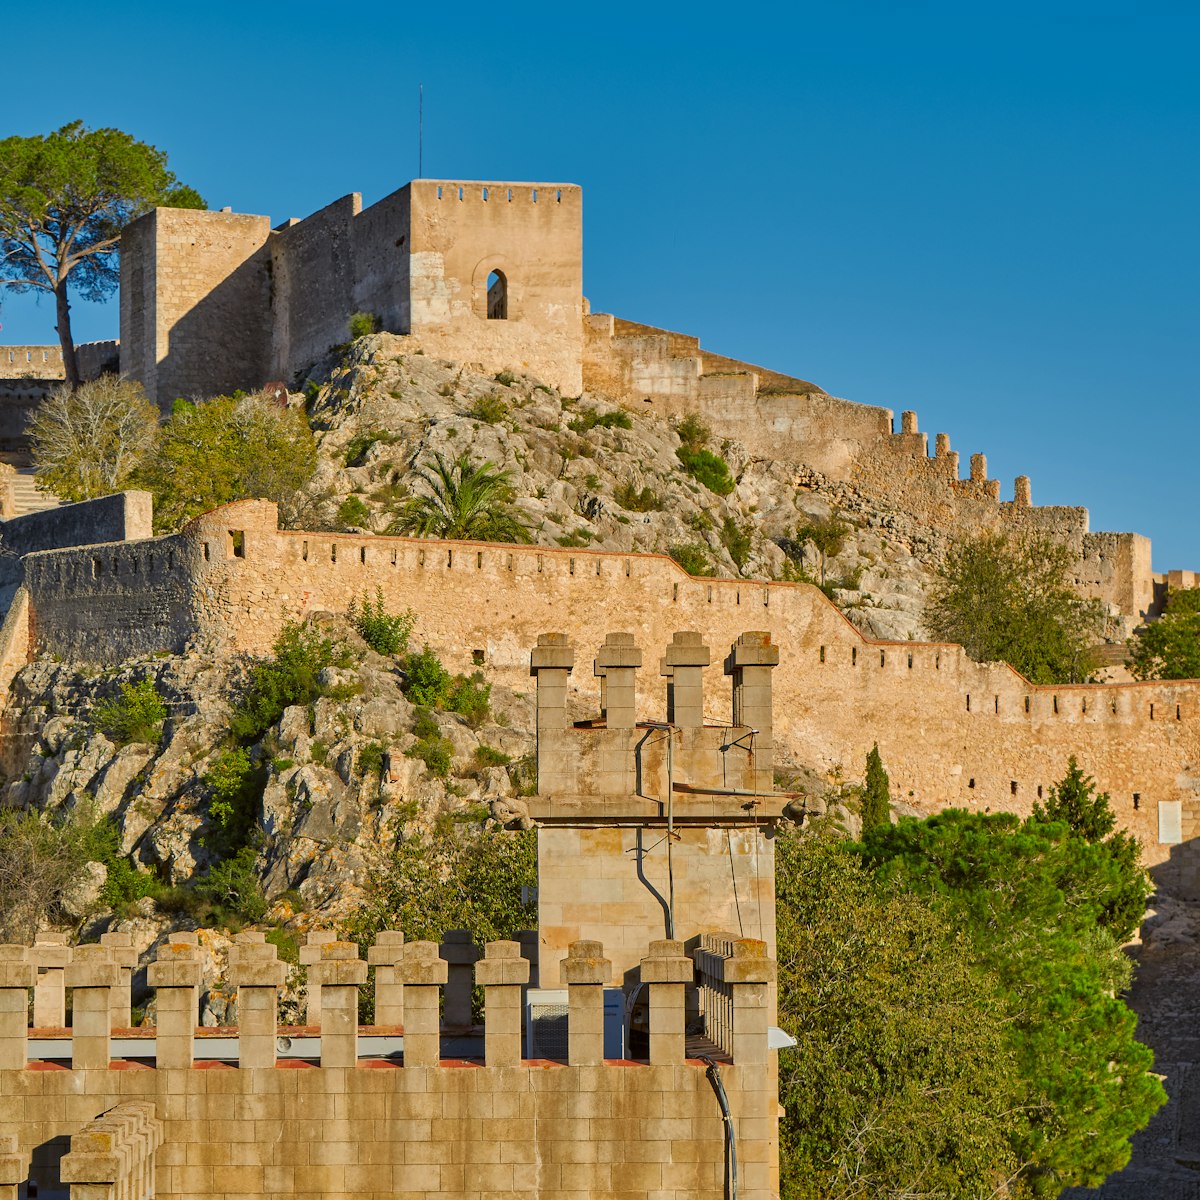 Historical Xativa Castle at sunset in the Valencia region of Spain.